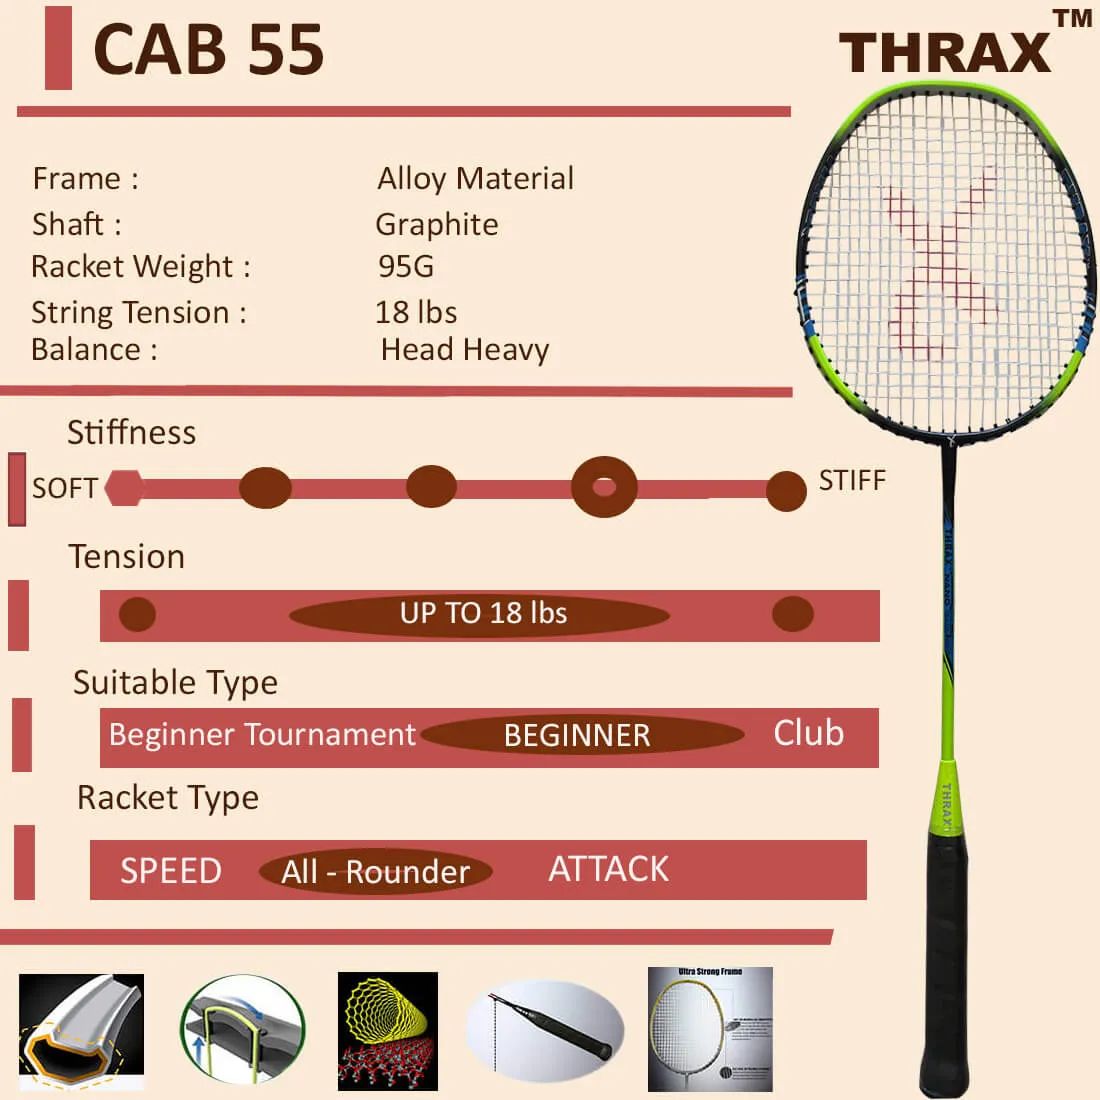 Thrax_CAB_55_Badminton_Racket_Technical_Specification_Lime